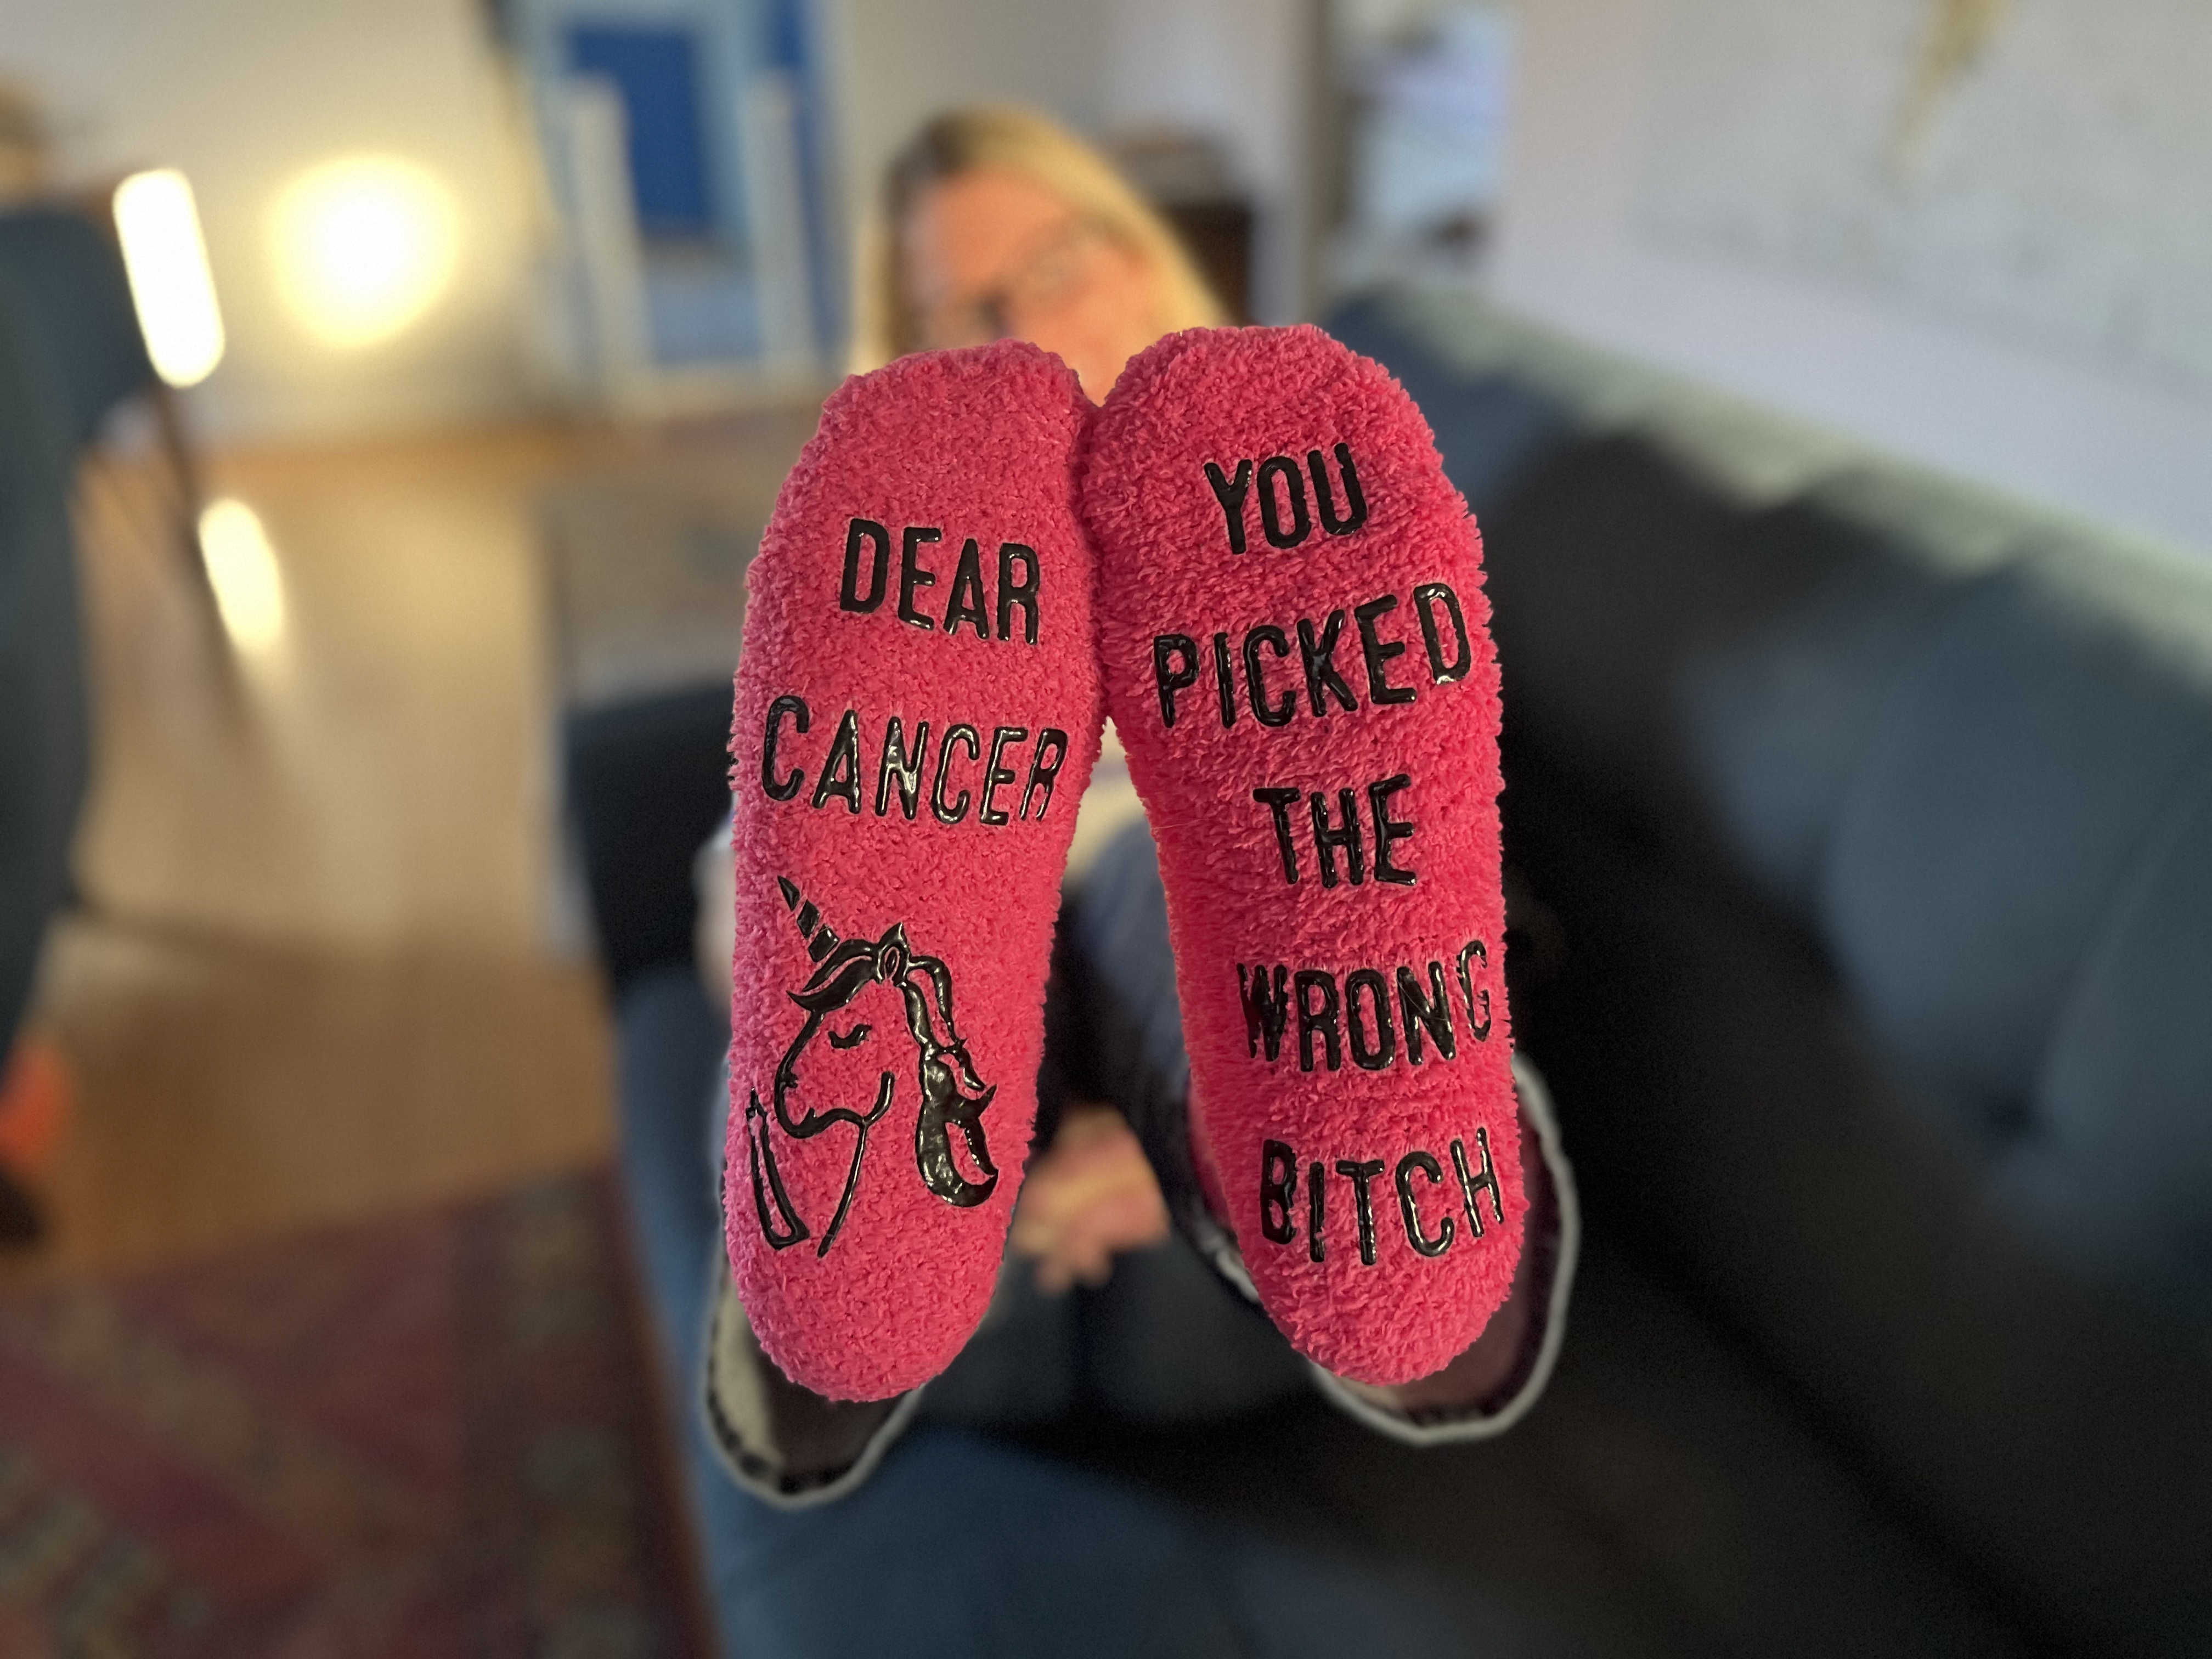 Pink socks featuring the words "Dear Cancer You picked the wrong *itch